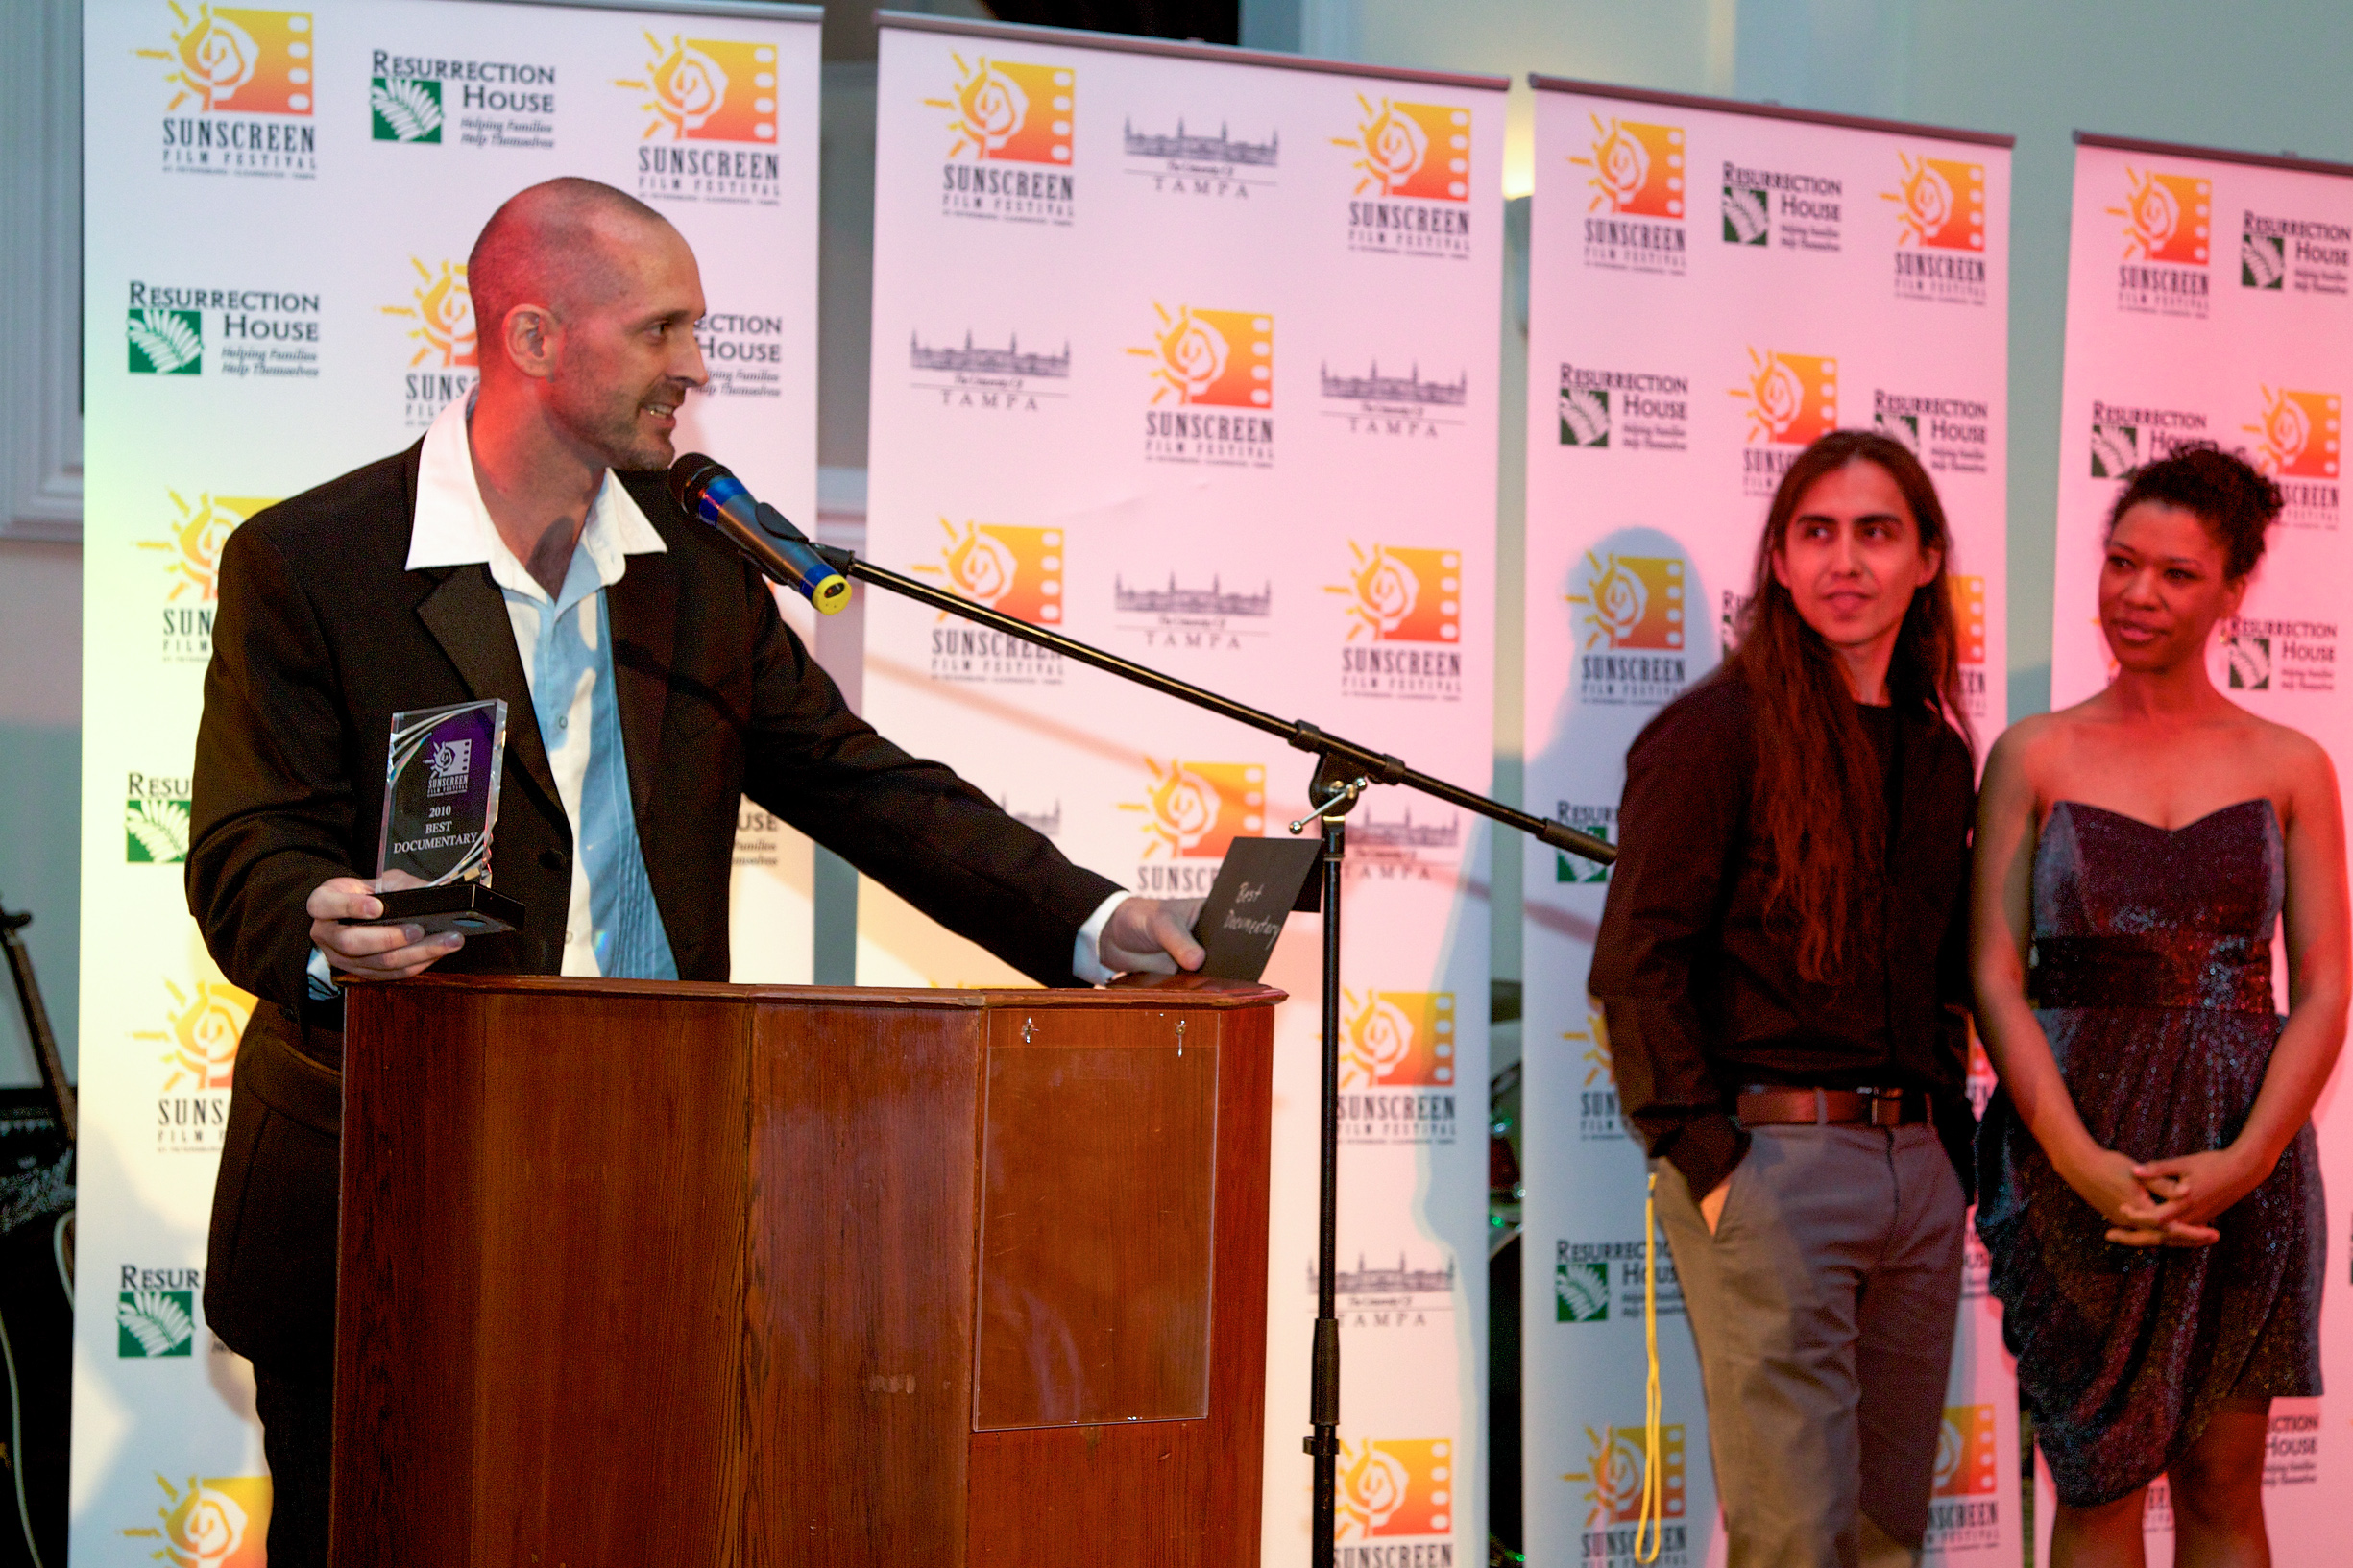 Accepting the award for BEST DOCUMENTARY at the Sunscreen Film Festival